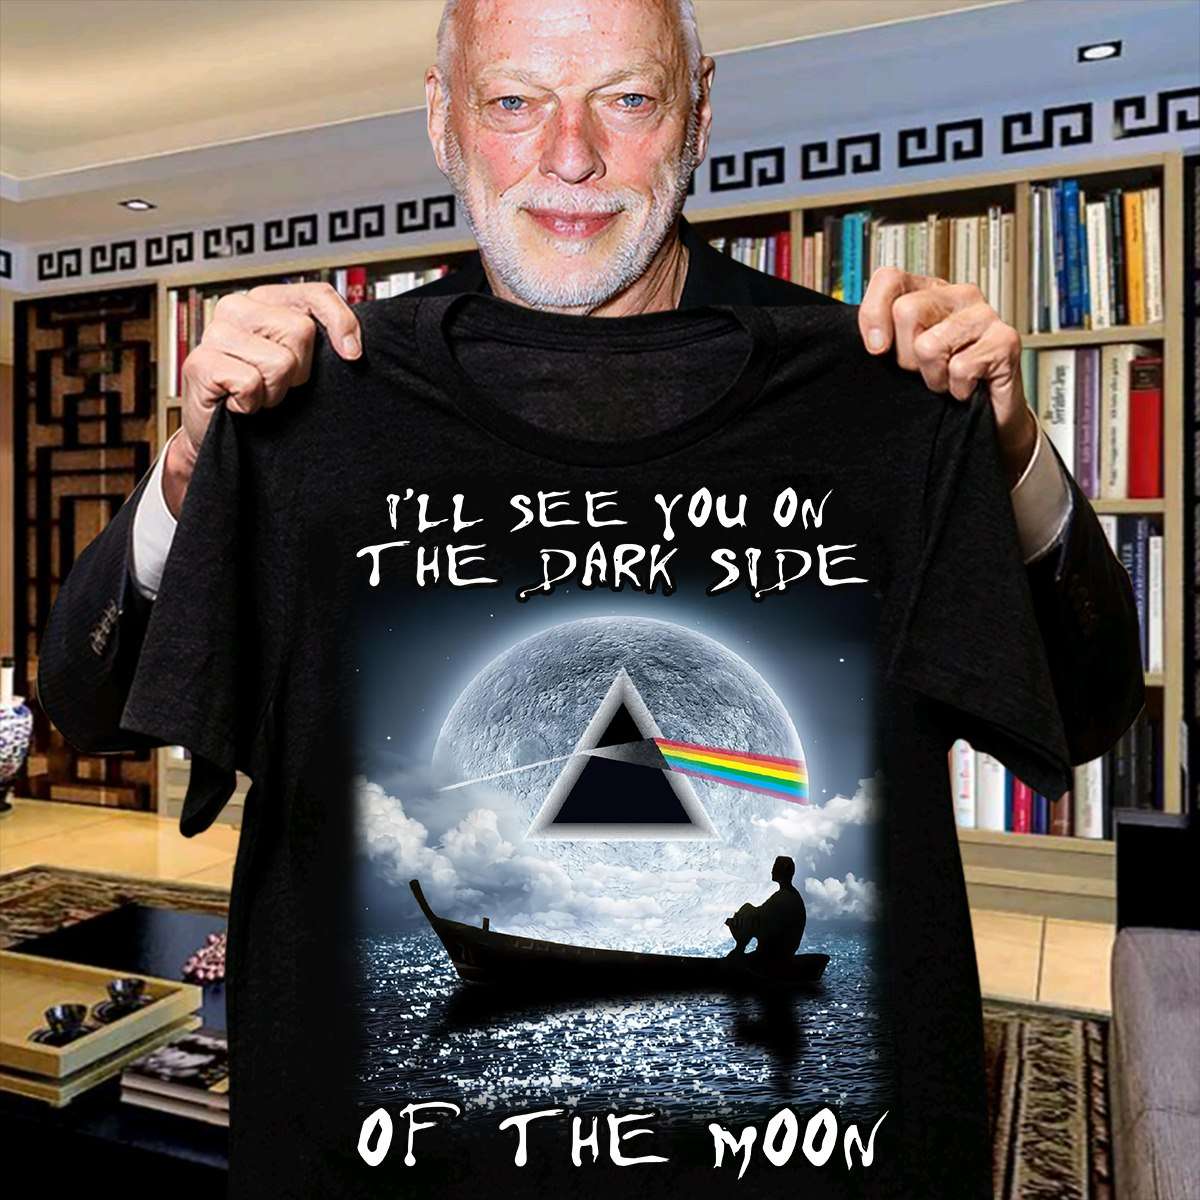 Man Looking Moon - I'll see you on the dark side of the moon